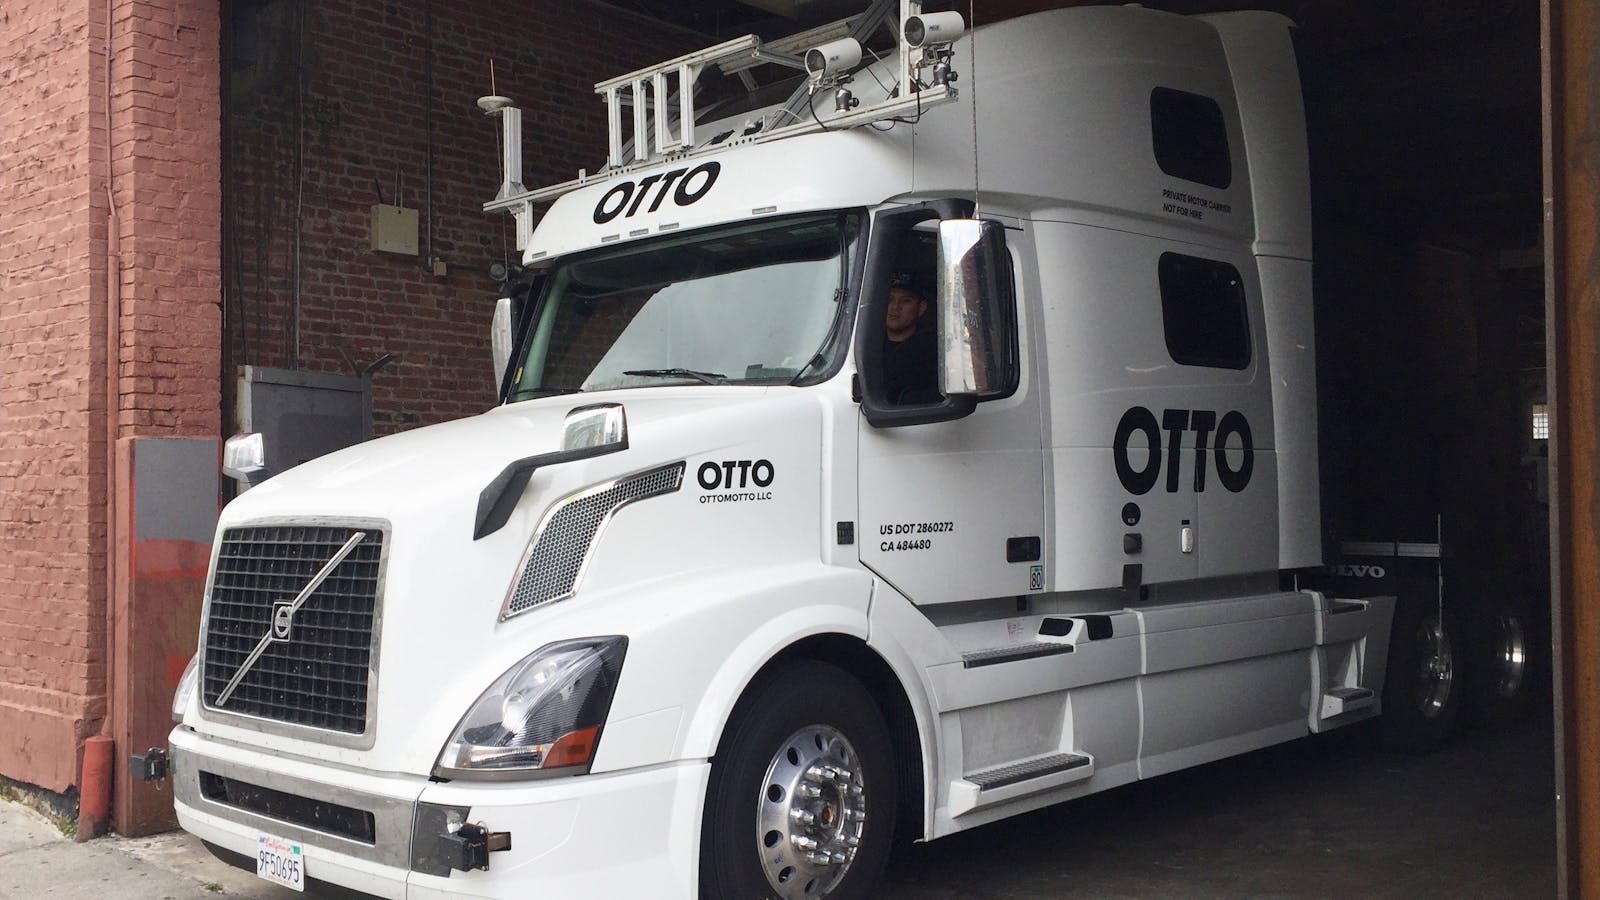 An Otto truck coming out of Otto's headquarters in San Francisco. Photo by Flickr/Steve Jurvetson.